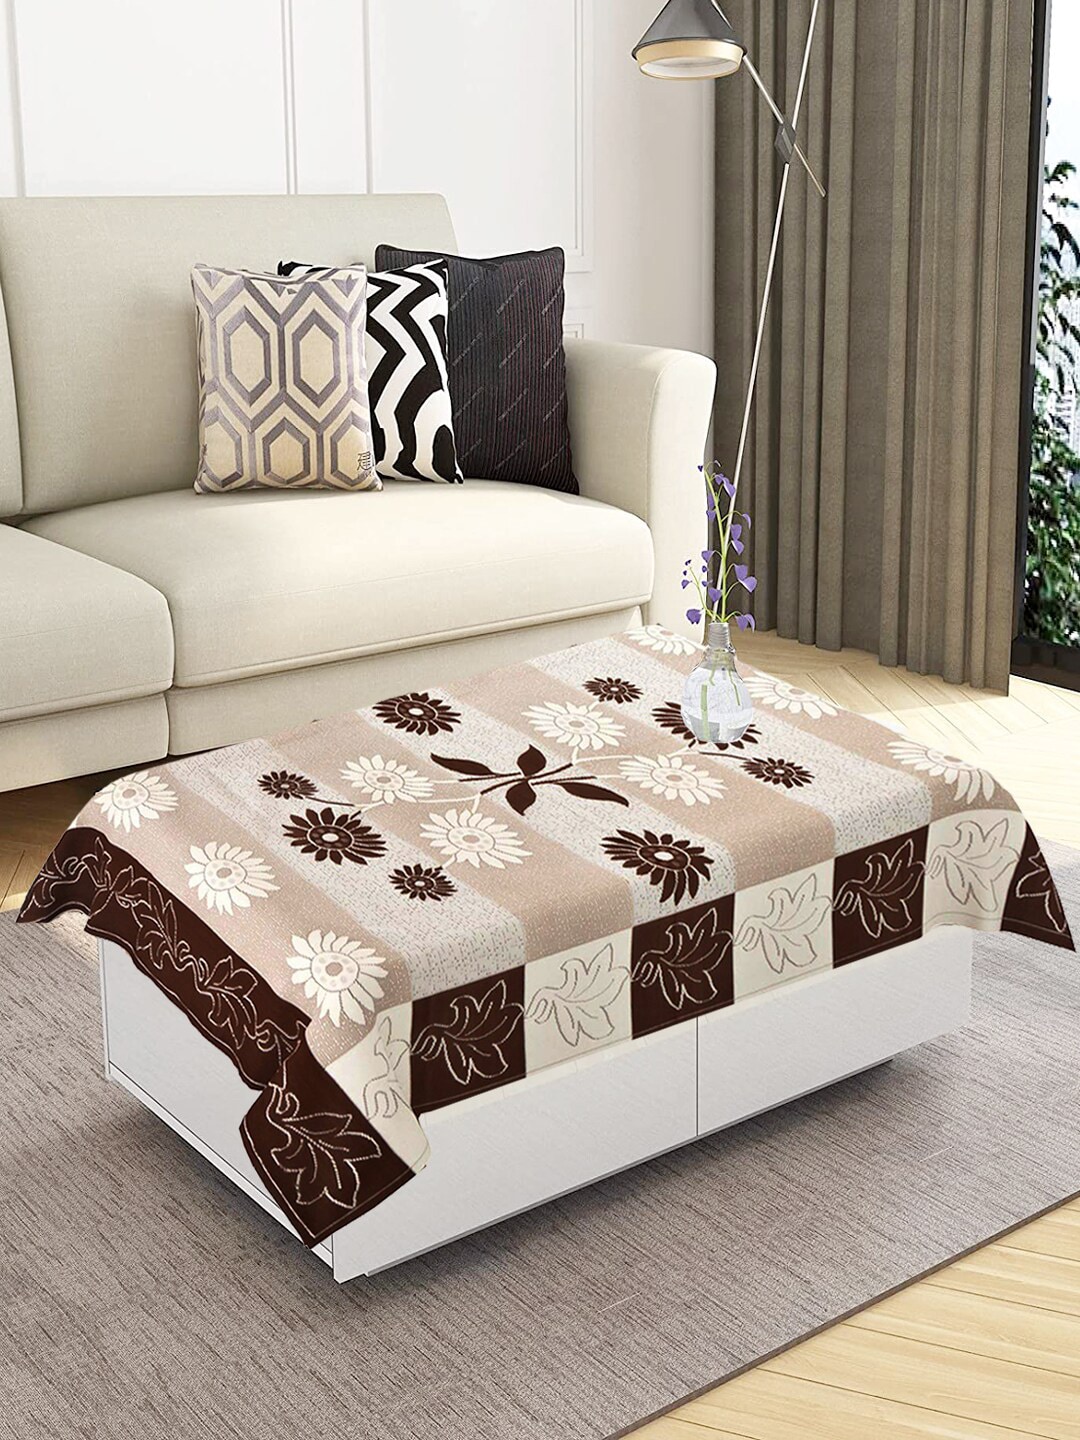 WEAVERS VILLA Coffee Brown 4 Seater Table Cover Price in India